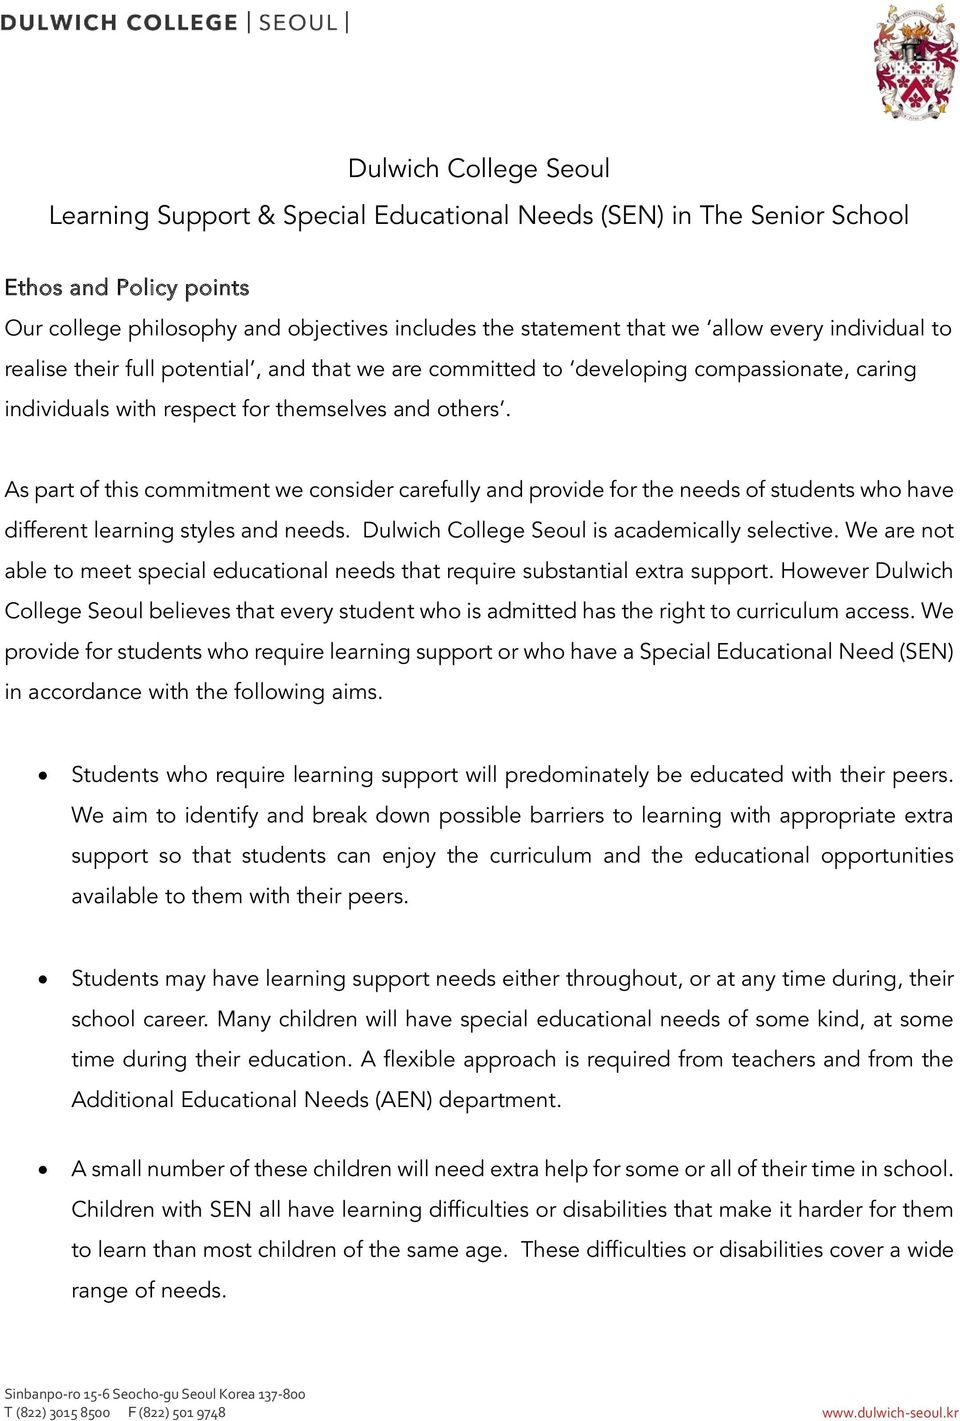 As part of this commitment we consider carefully and provide for the needs of students who have different learning styles and needs. Dulwich College Seoul is academically selective.